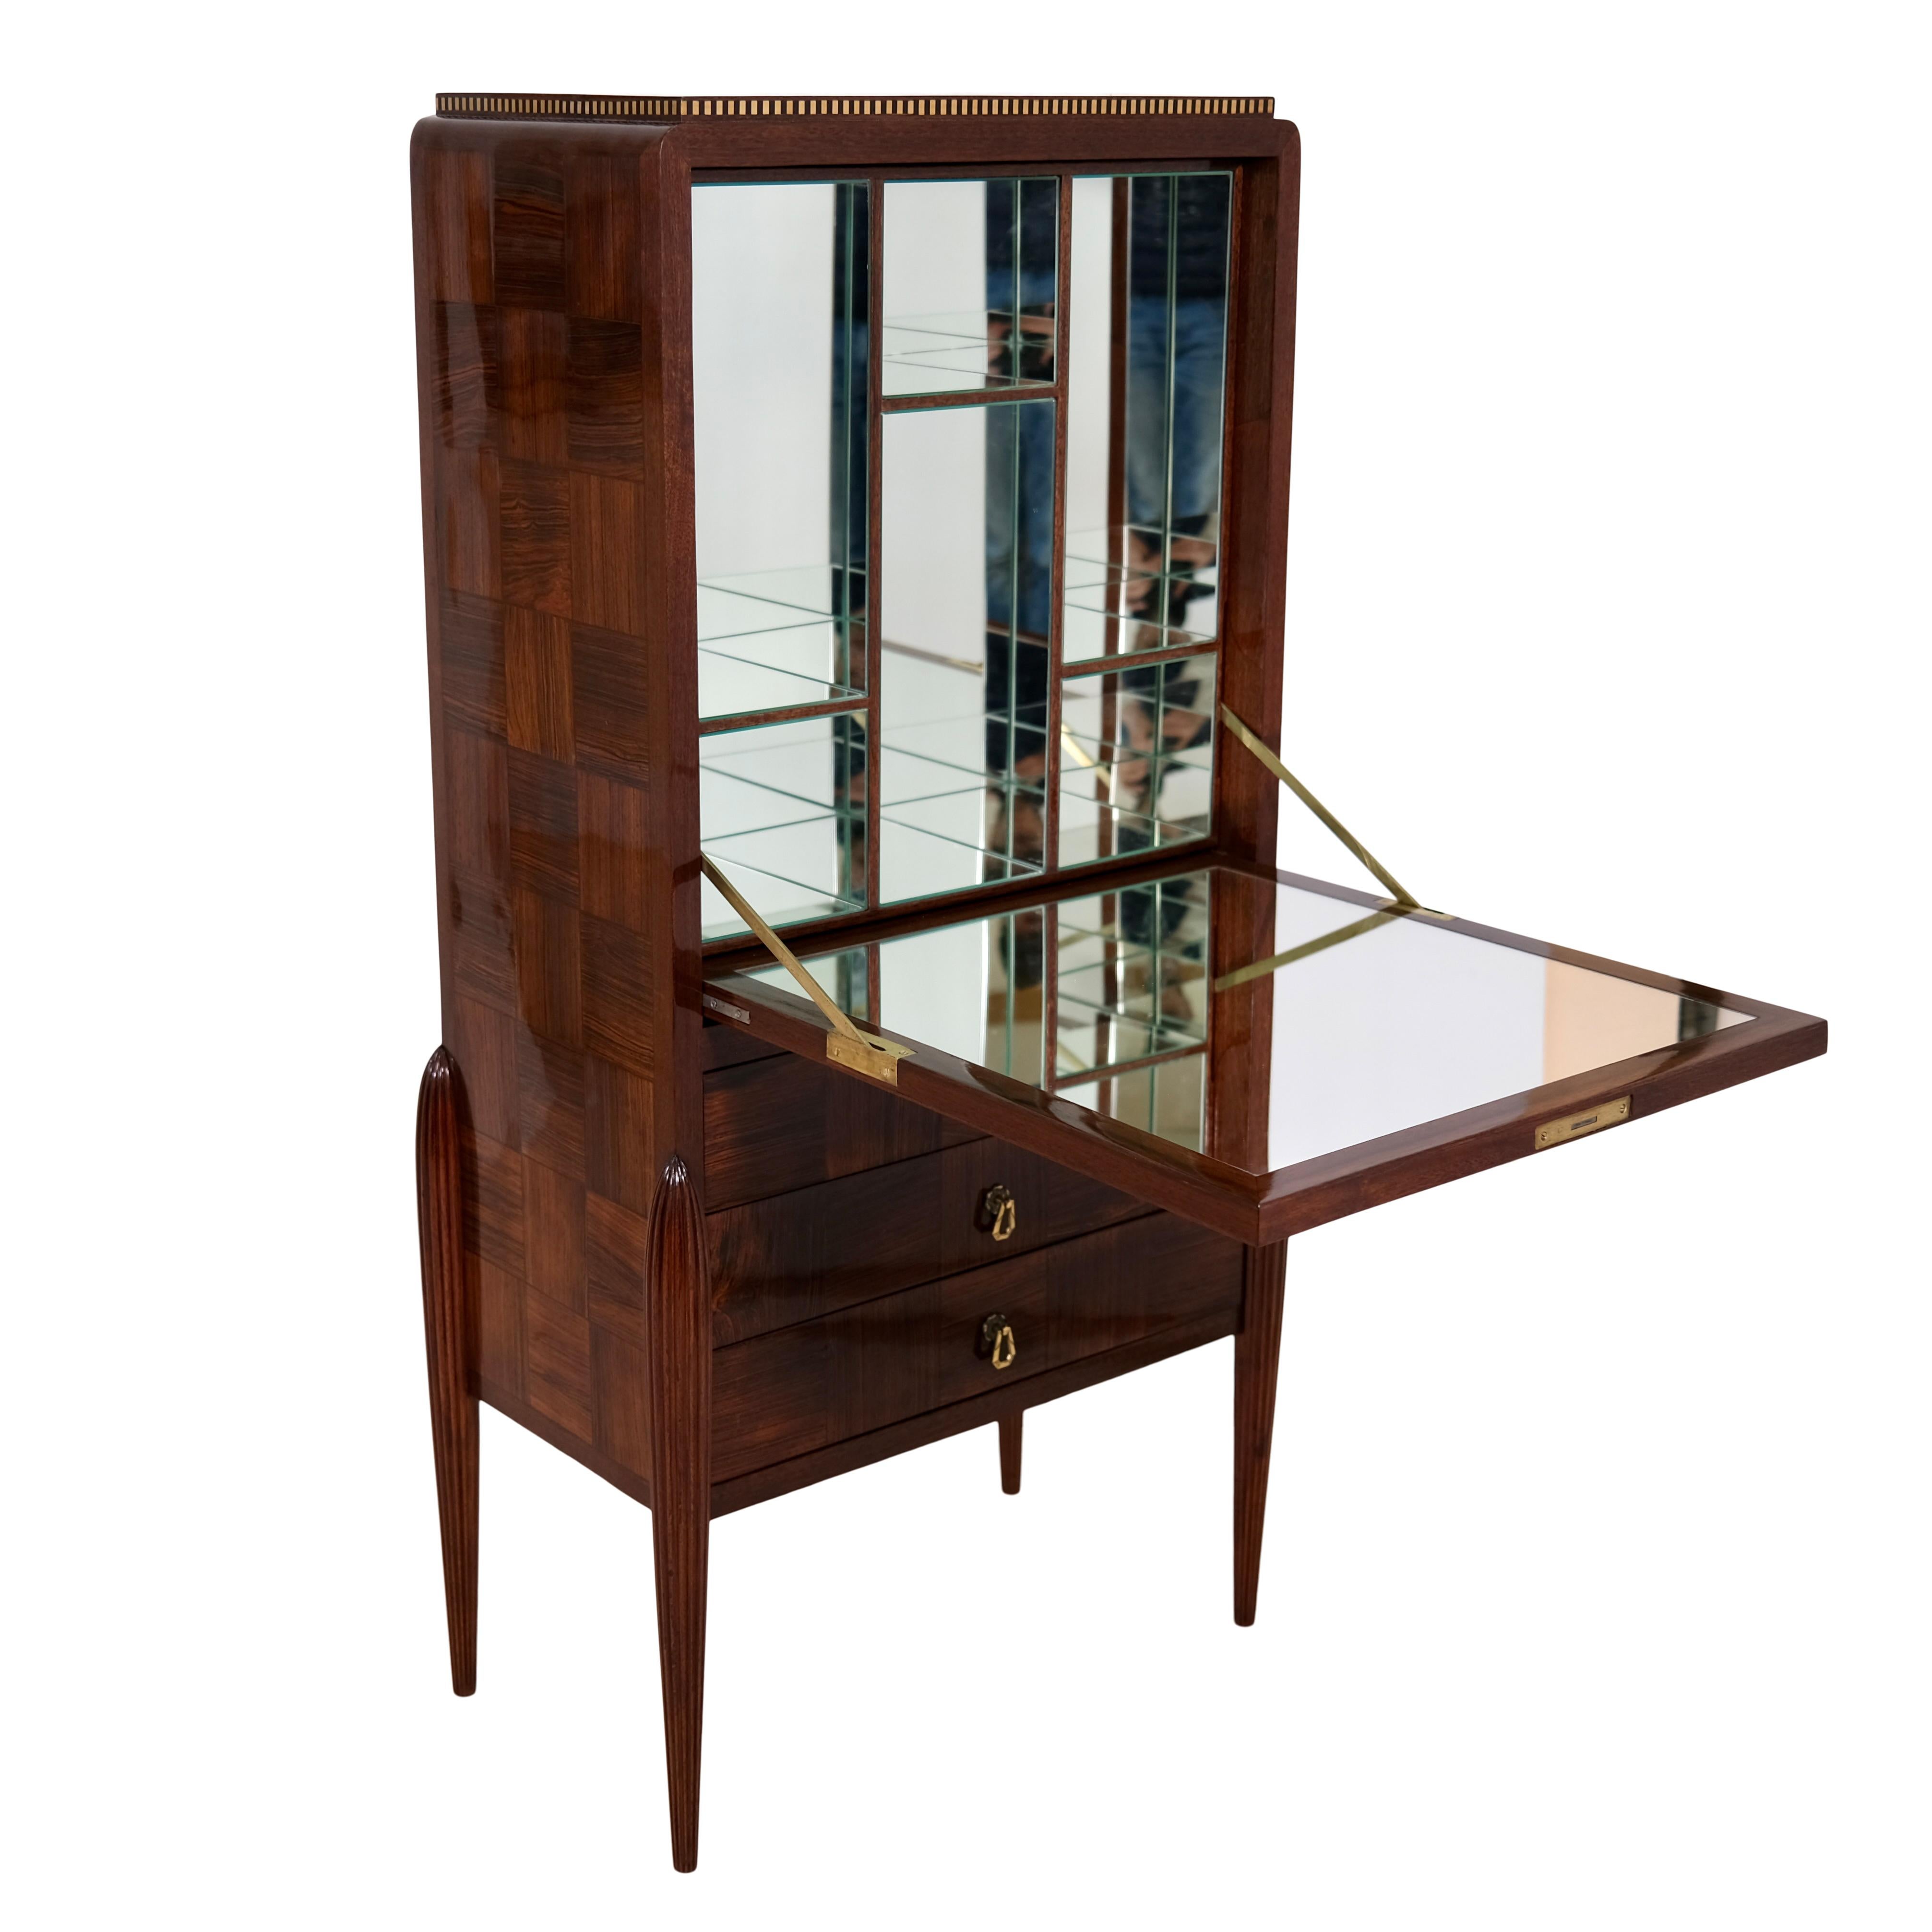 Polished Early French Art Deco Secretaire Desk with Marquetry and Inlays For Sale